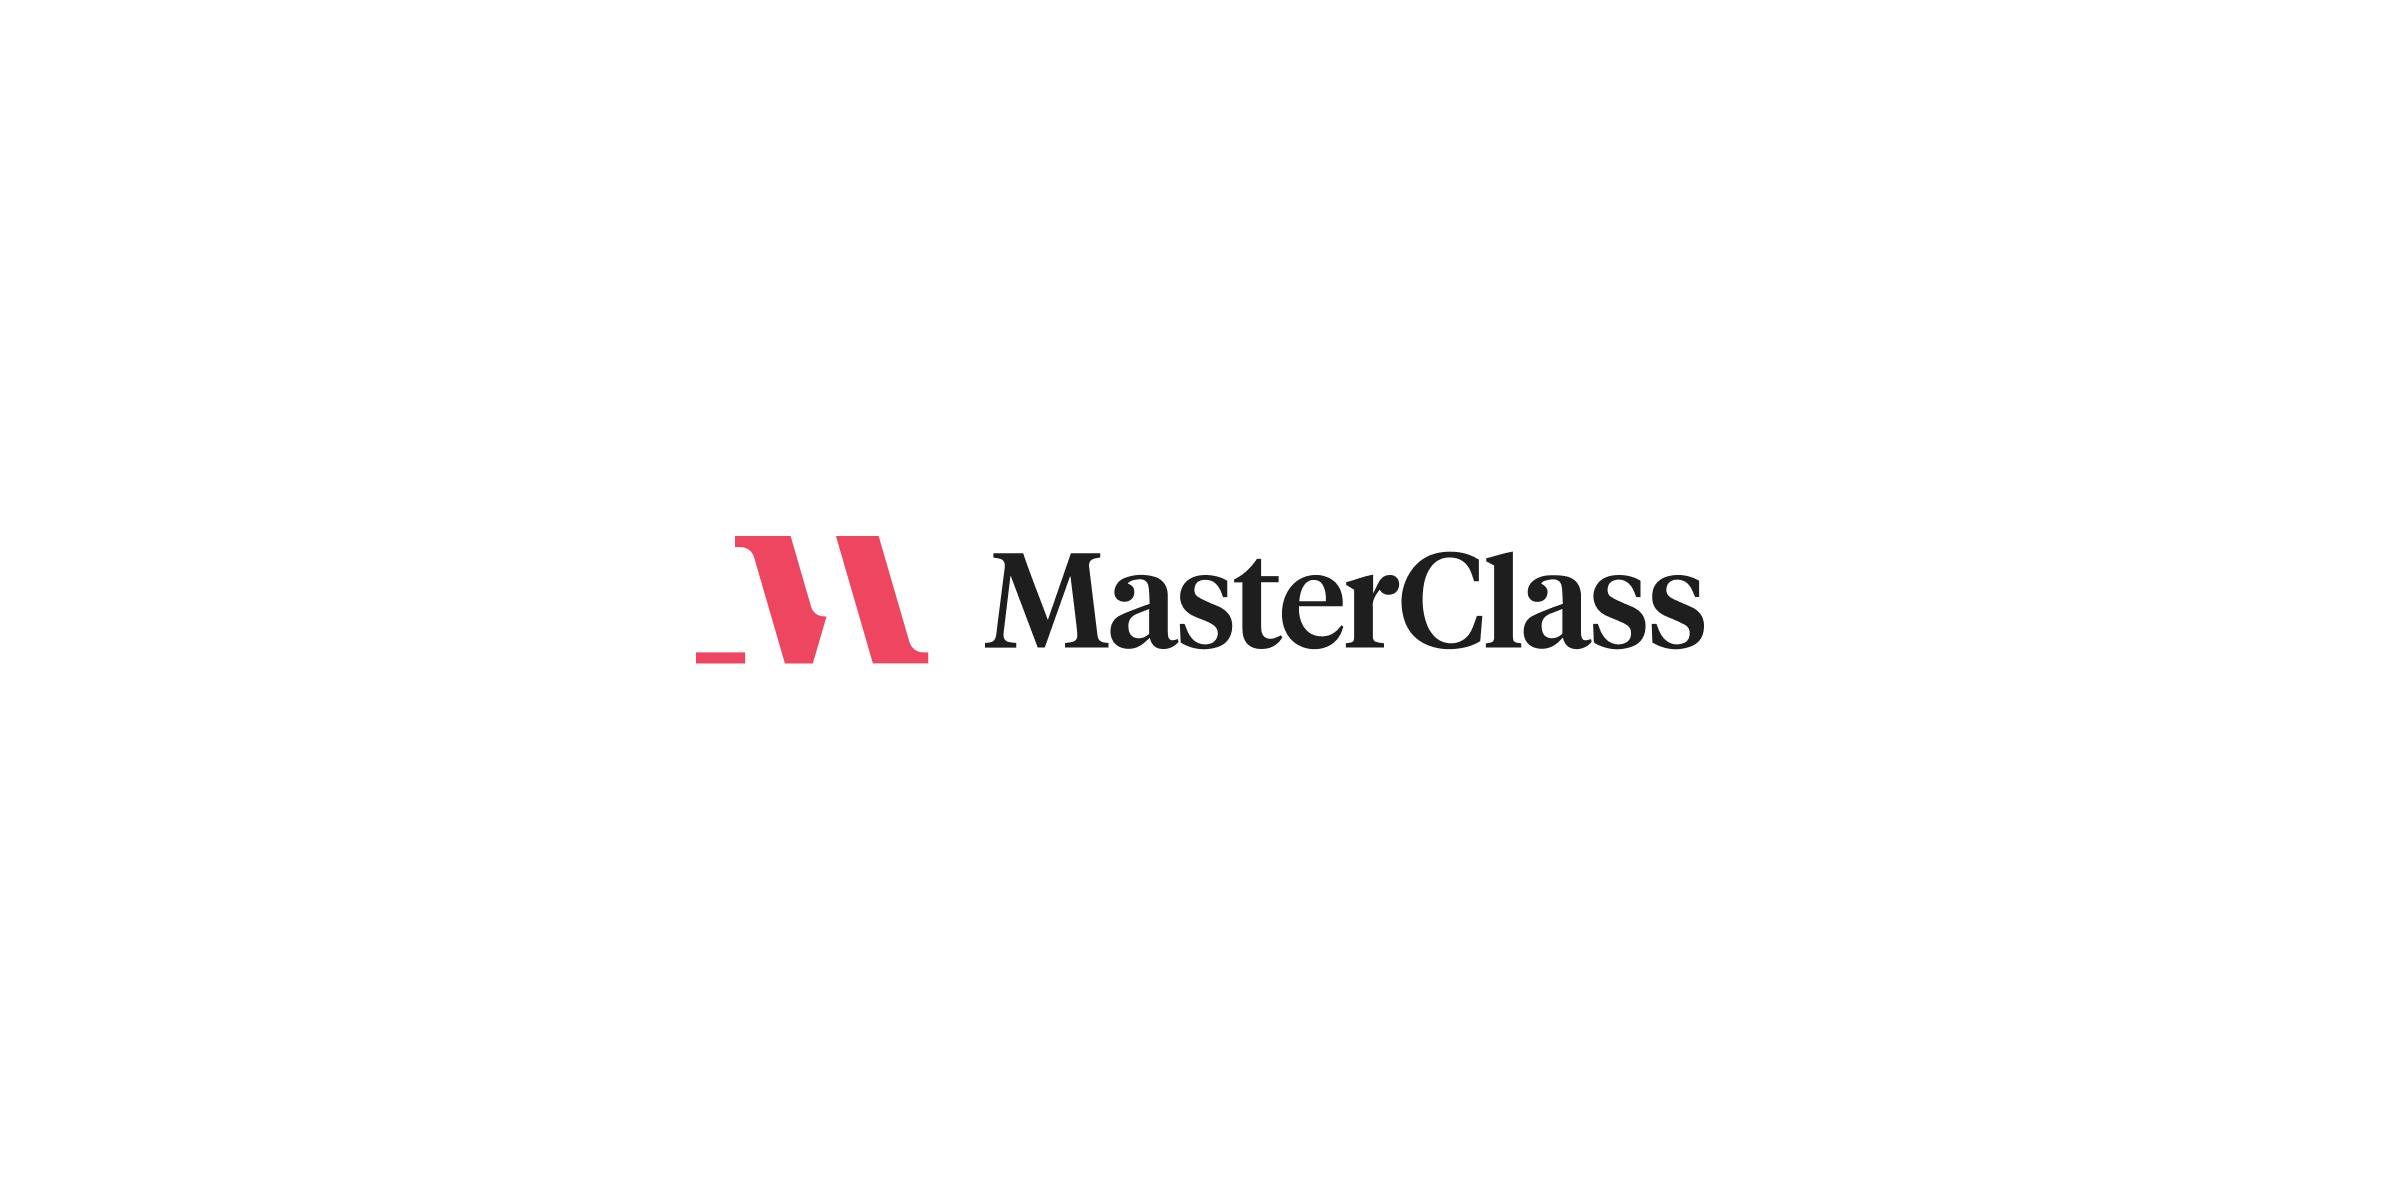 MasterClass more than triples valuation in one year